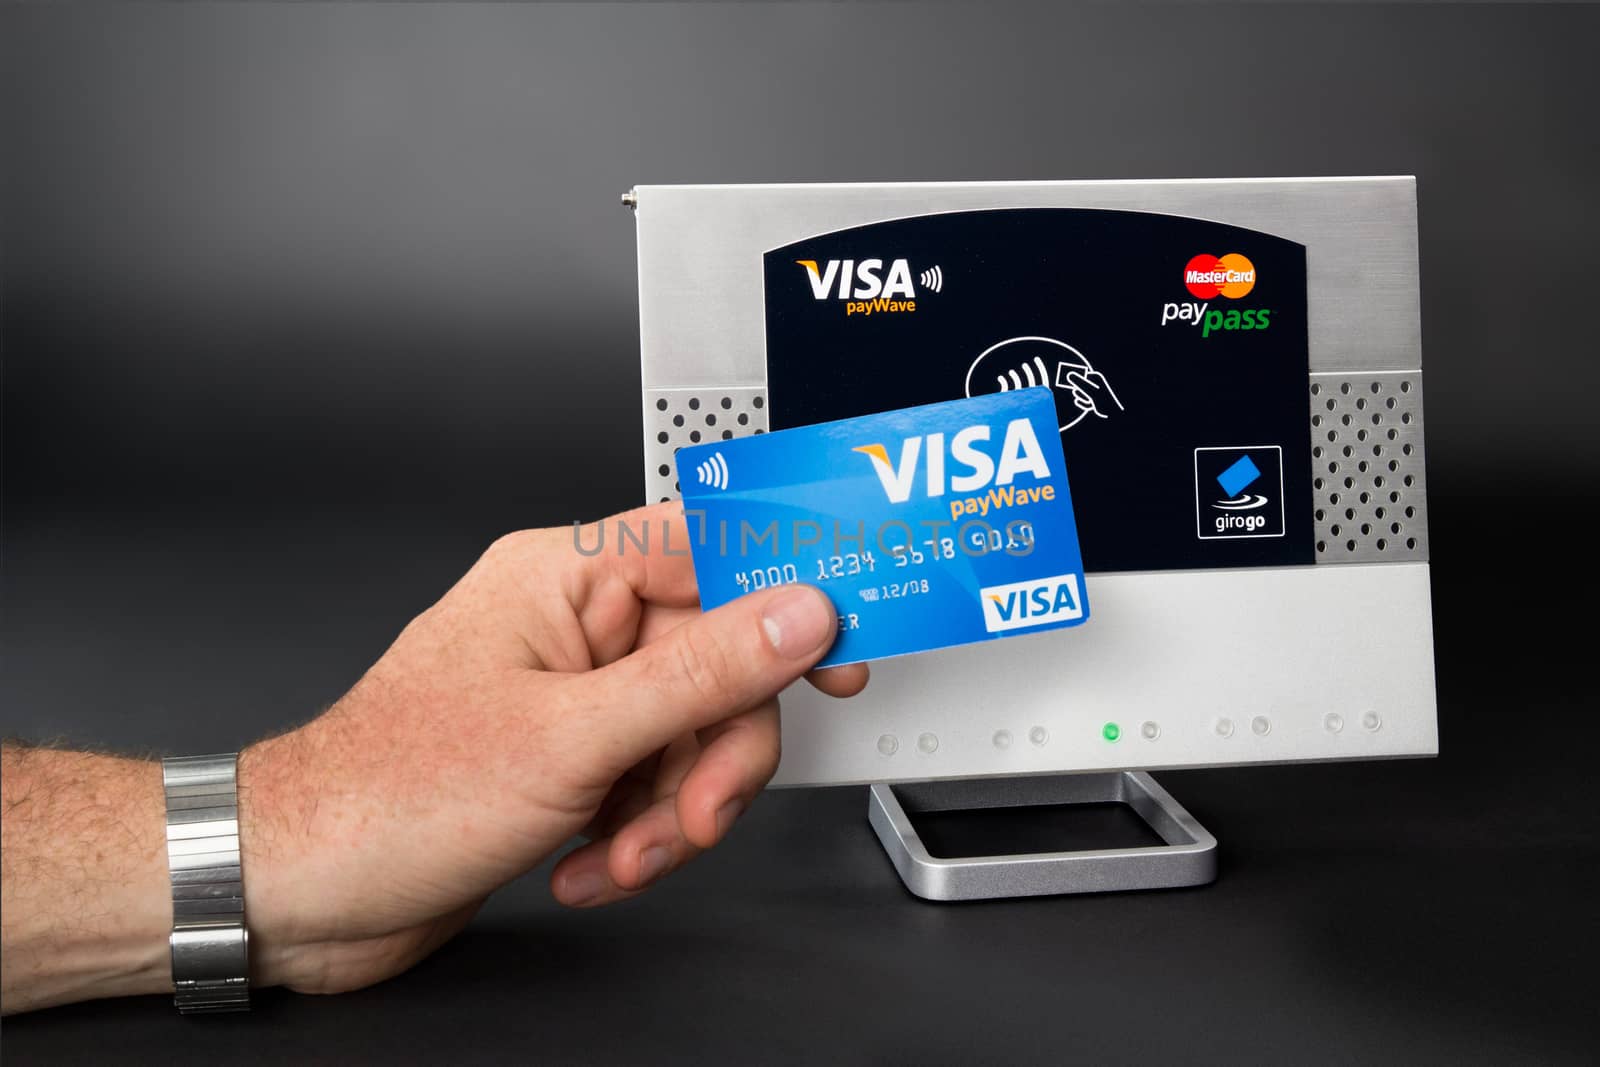 Aachen, Germany - August 05, 2012: Studioshot of payment action with the Visa Paywave credit card in front of a NFC terminal wich accepts visa, mastercard, american express and girogo contactless payments.